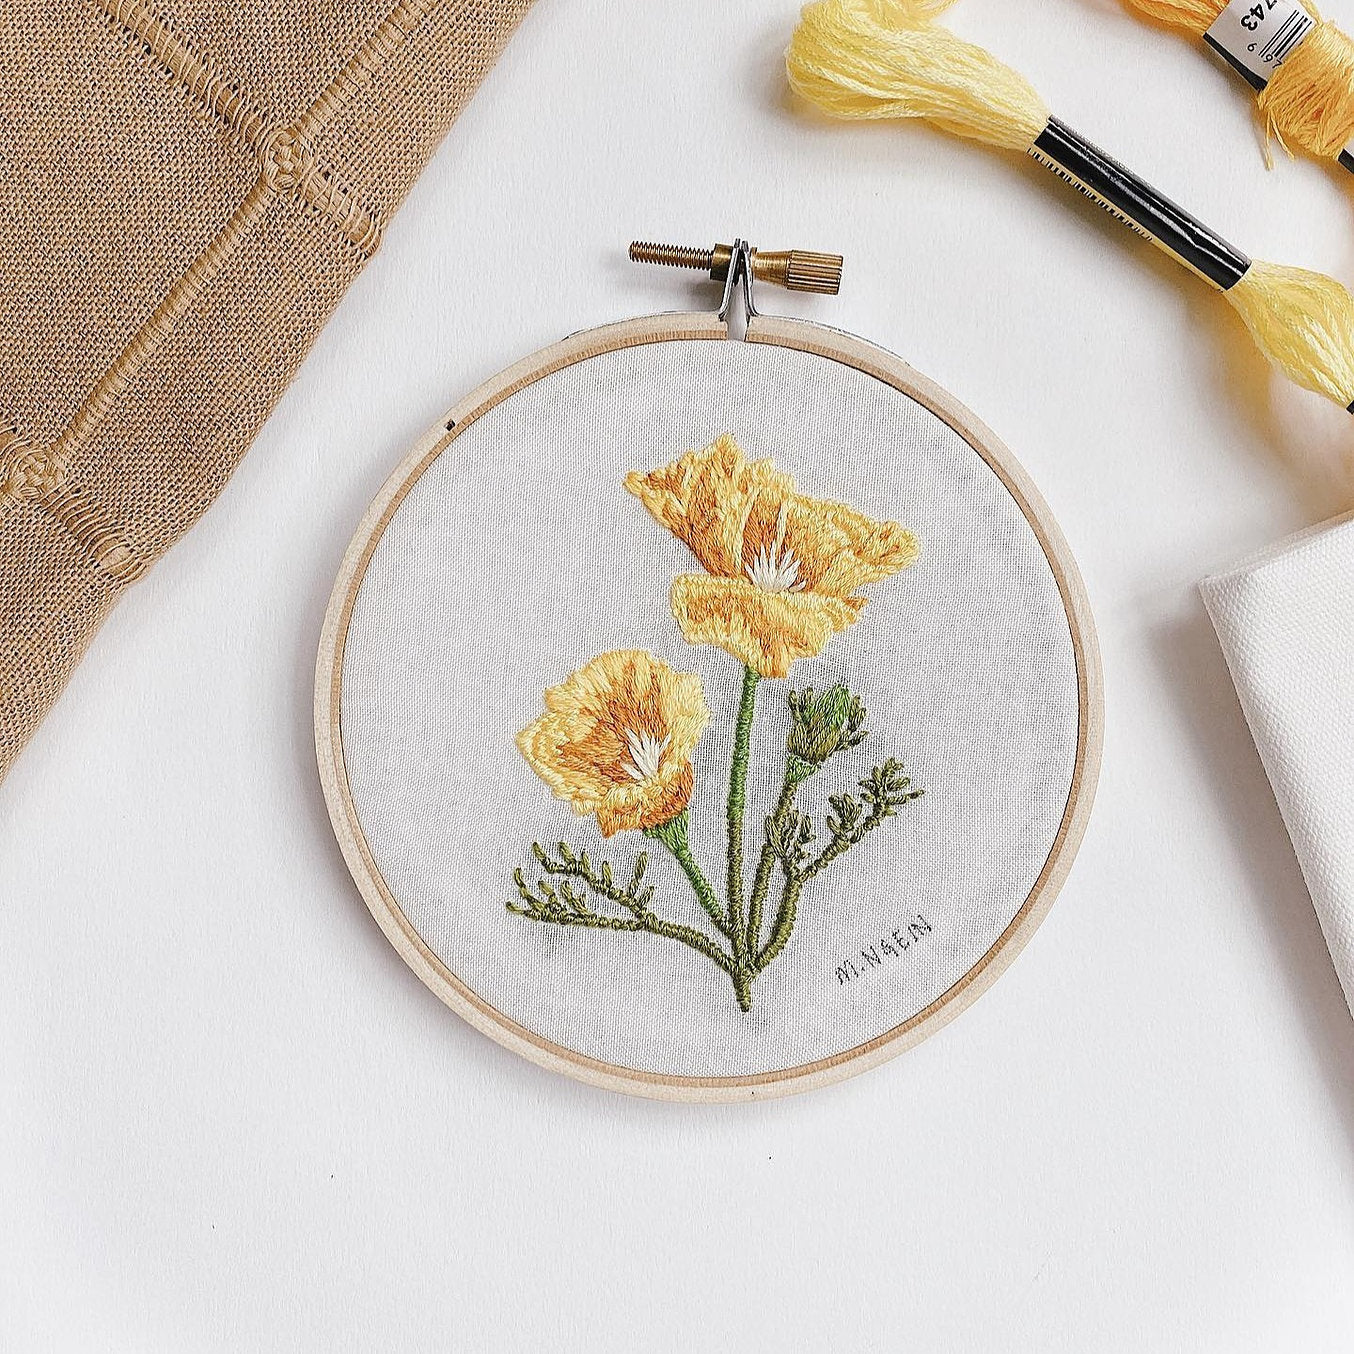 California Poppy - Embroidery Hoop - LM